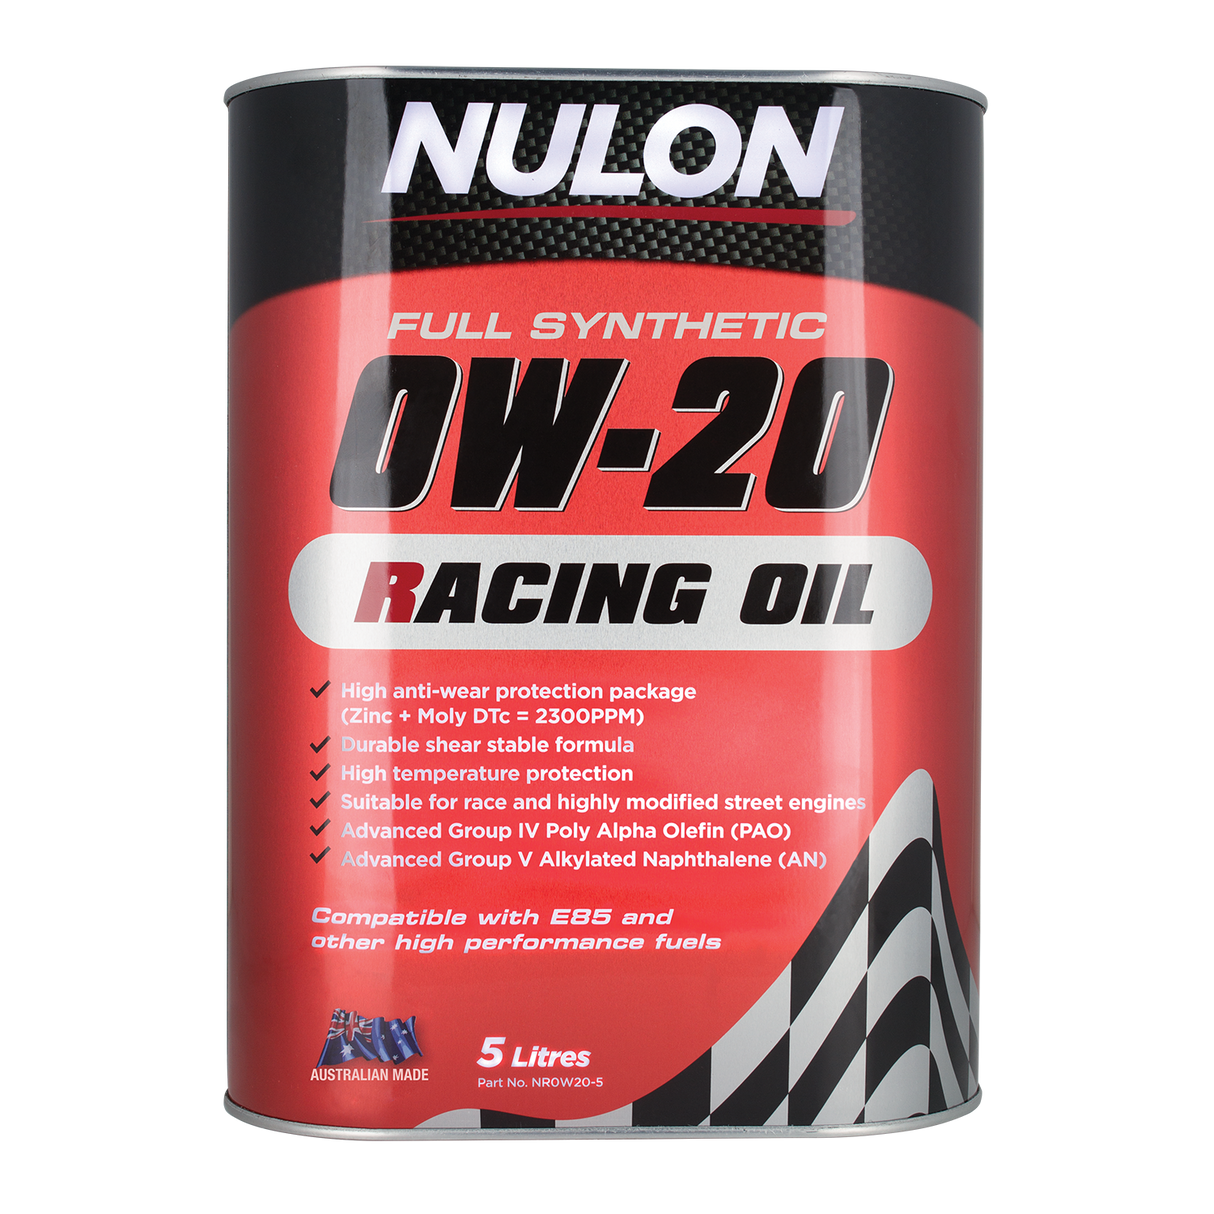 Full Synthetic 0W-20 Racing Oil - Nulon | Universal Auto Spares